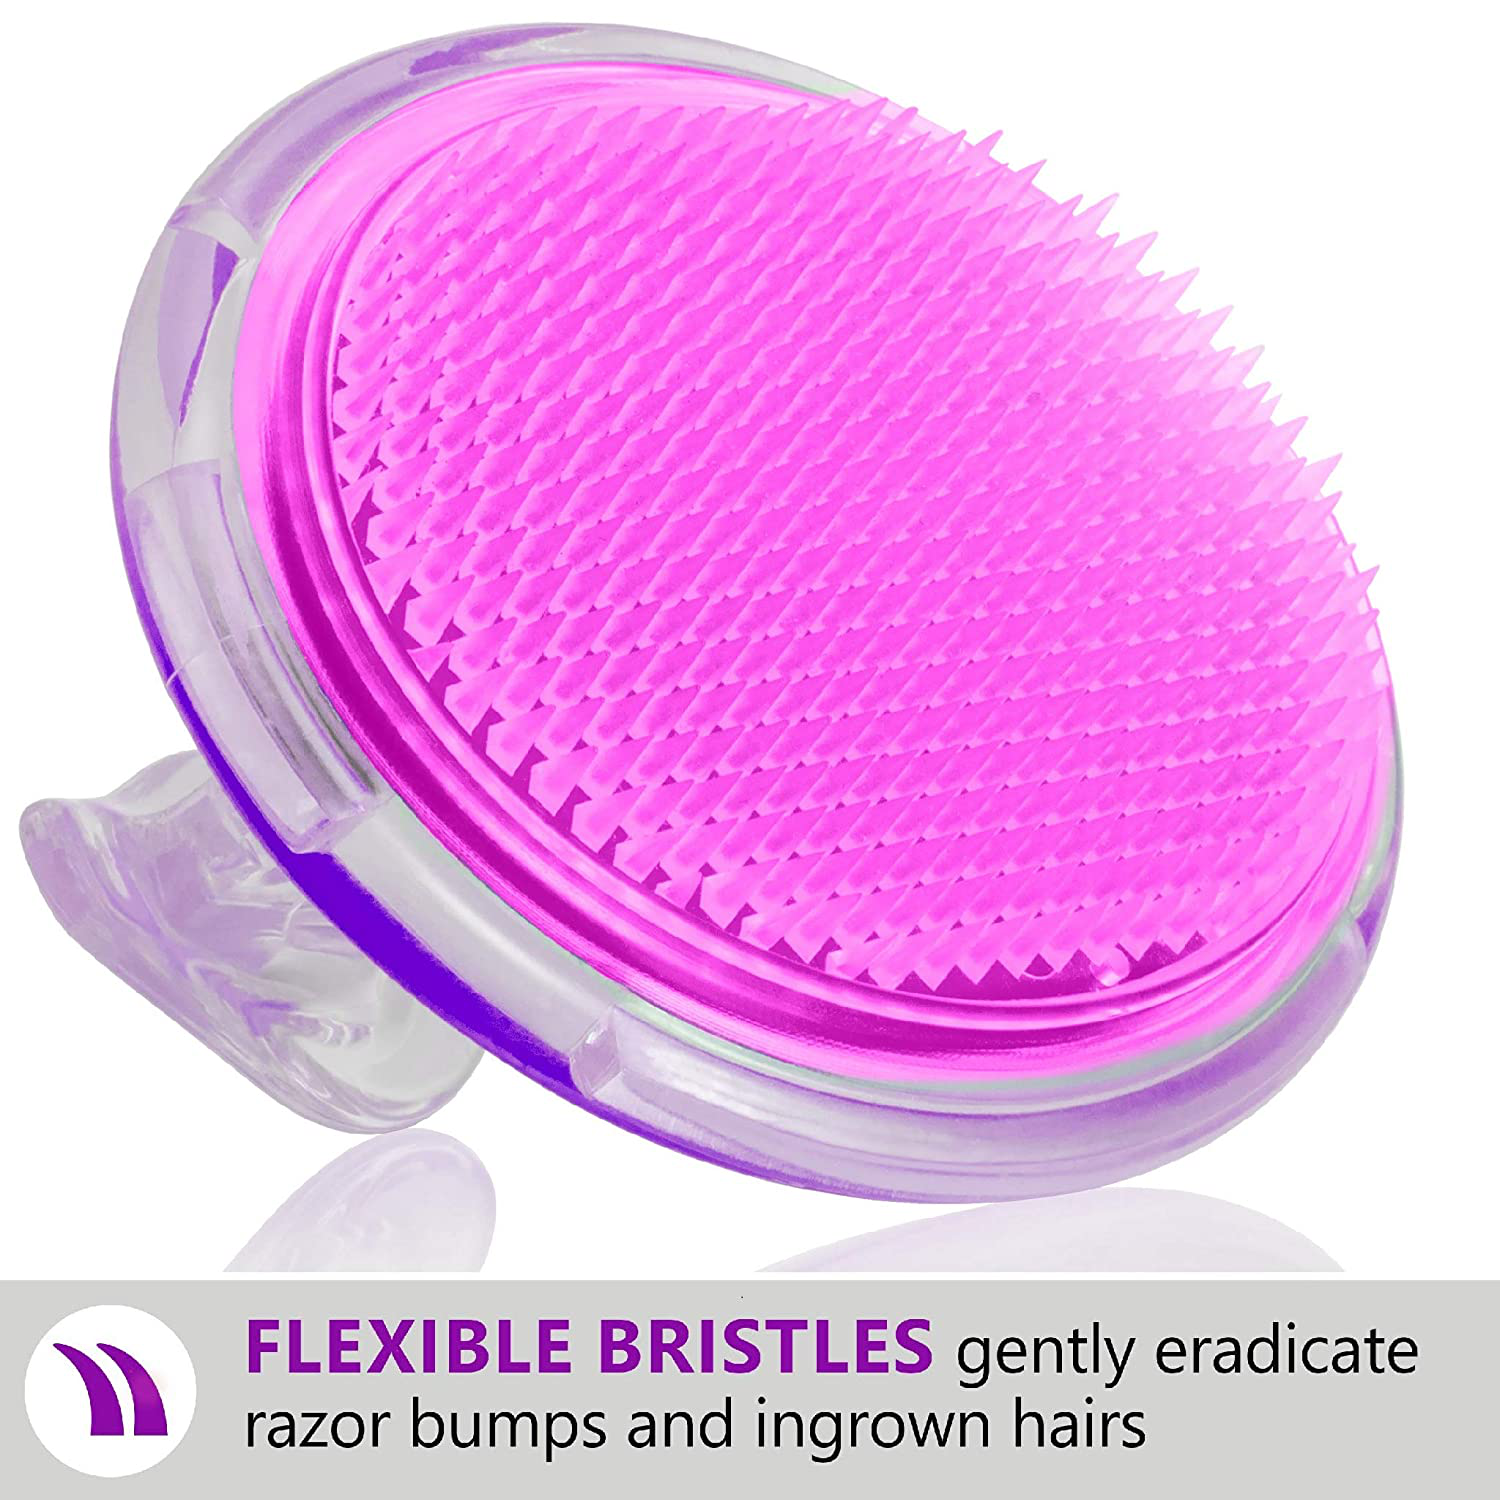 Exfoliating Brush For Razor Bumps and Ingrown Hair Treatment, Silicone Face Scrubbers, Face and Body Exfoliator Set - Perfect for Dry Brushing, by Dylonic